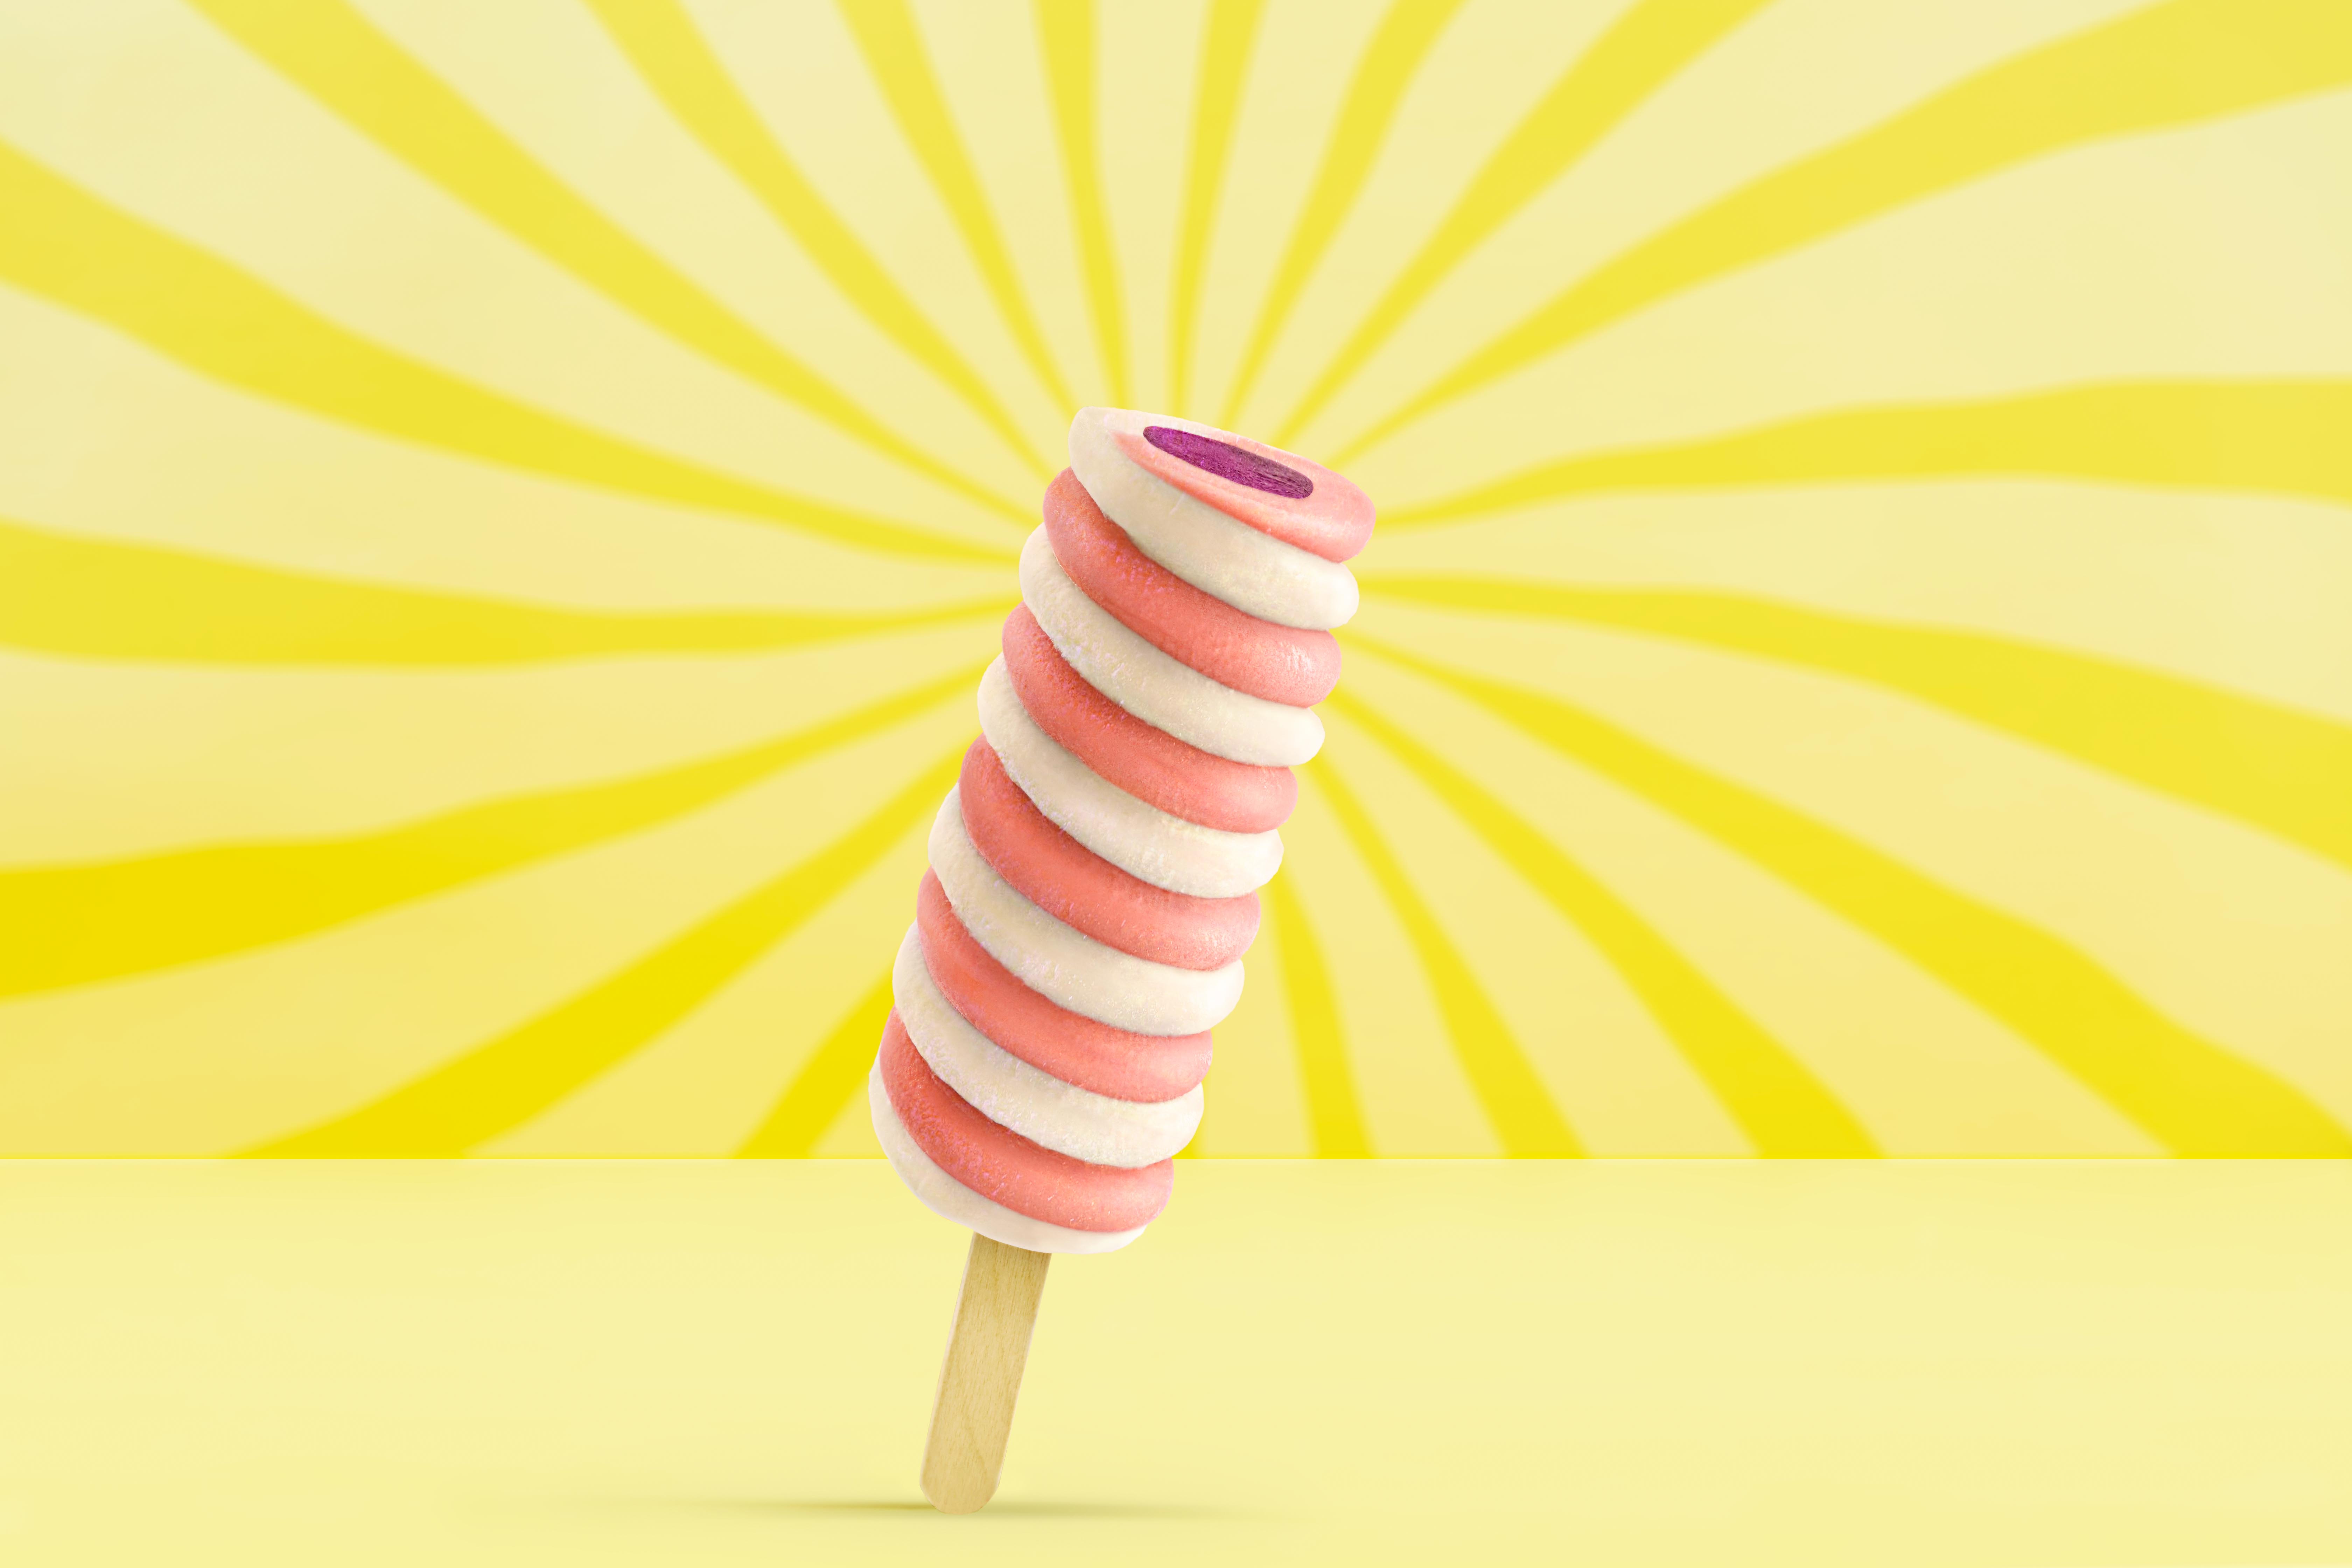 dominic-perri-new-work-unilever-popsicle-Product_1_final_pink_full1